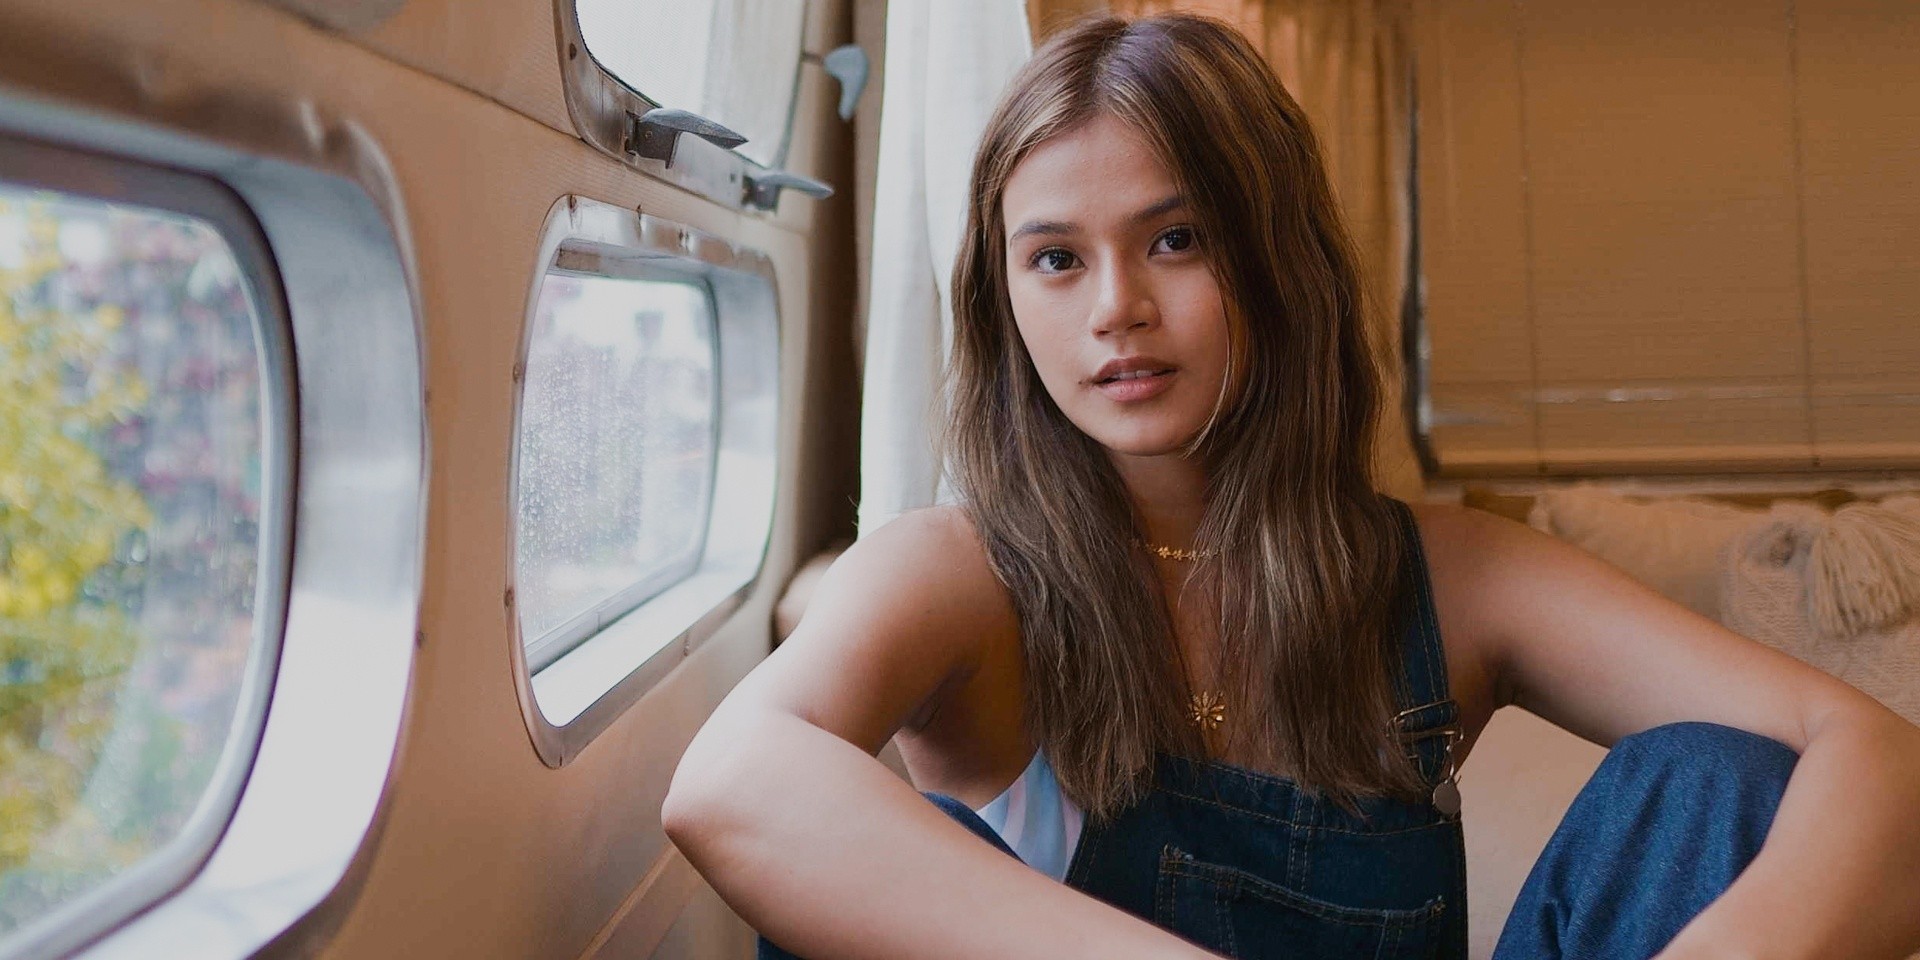 Maris Racal on bringing joy through her music and world-famous memes